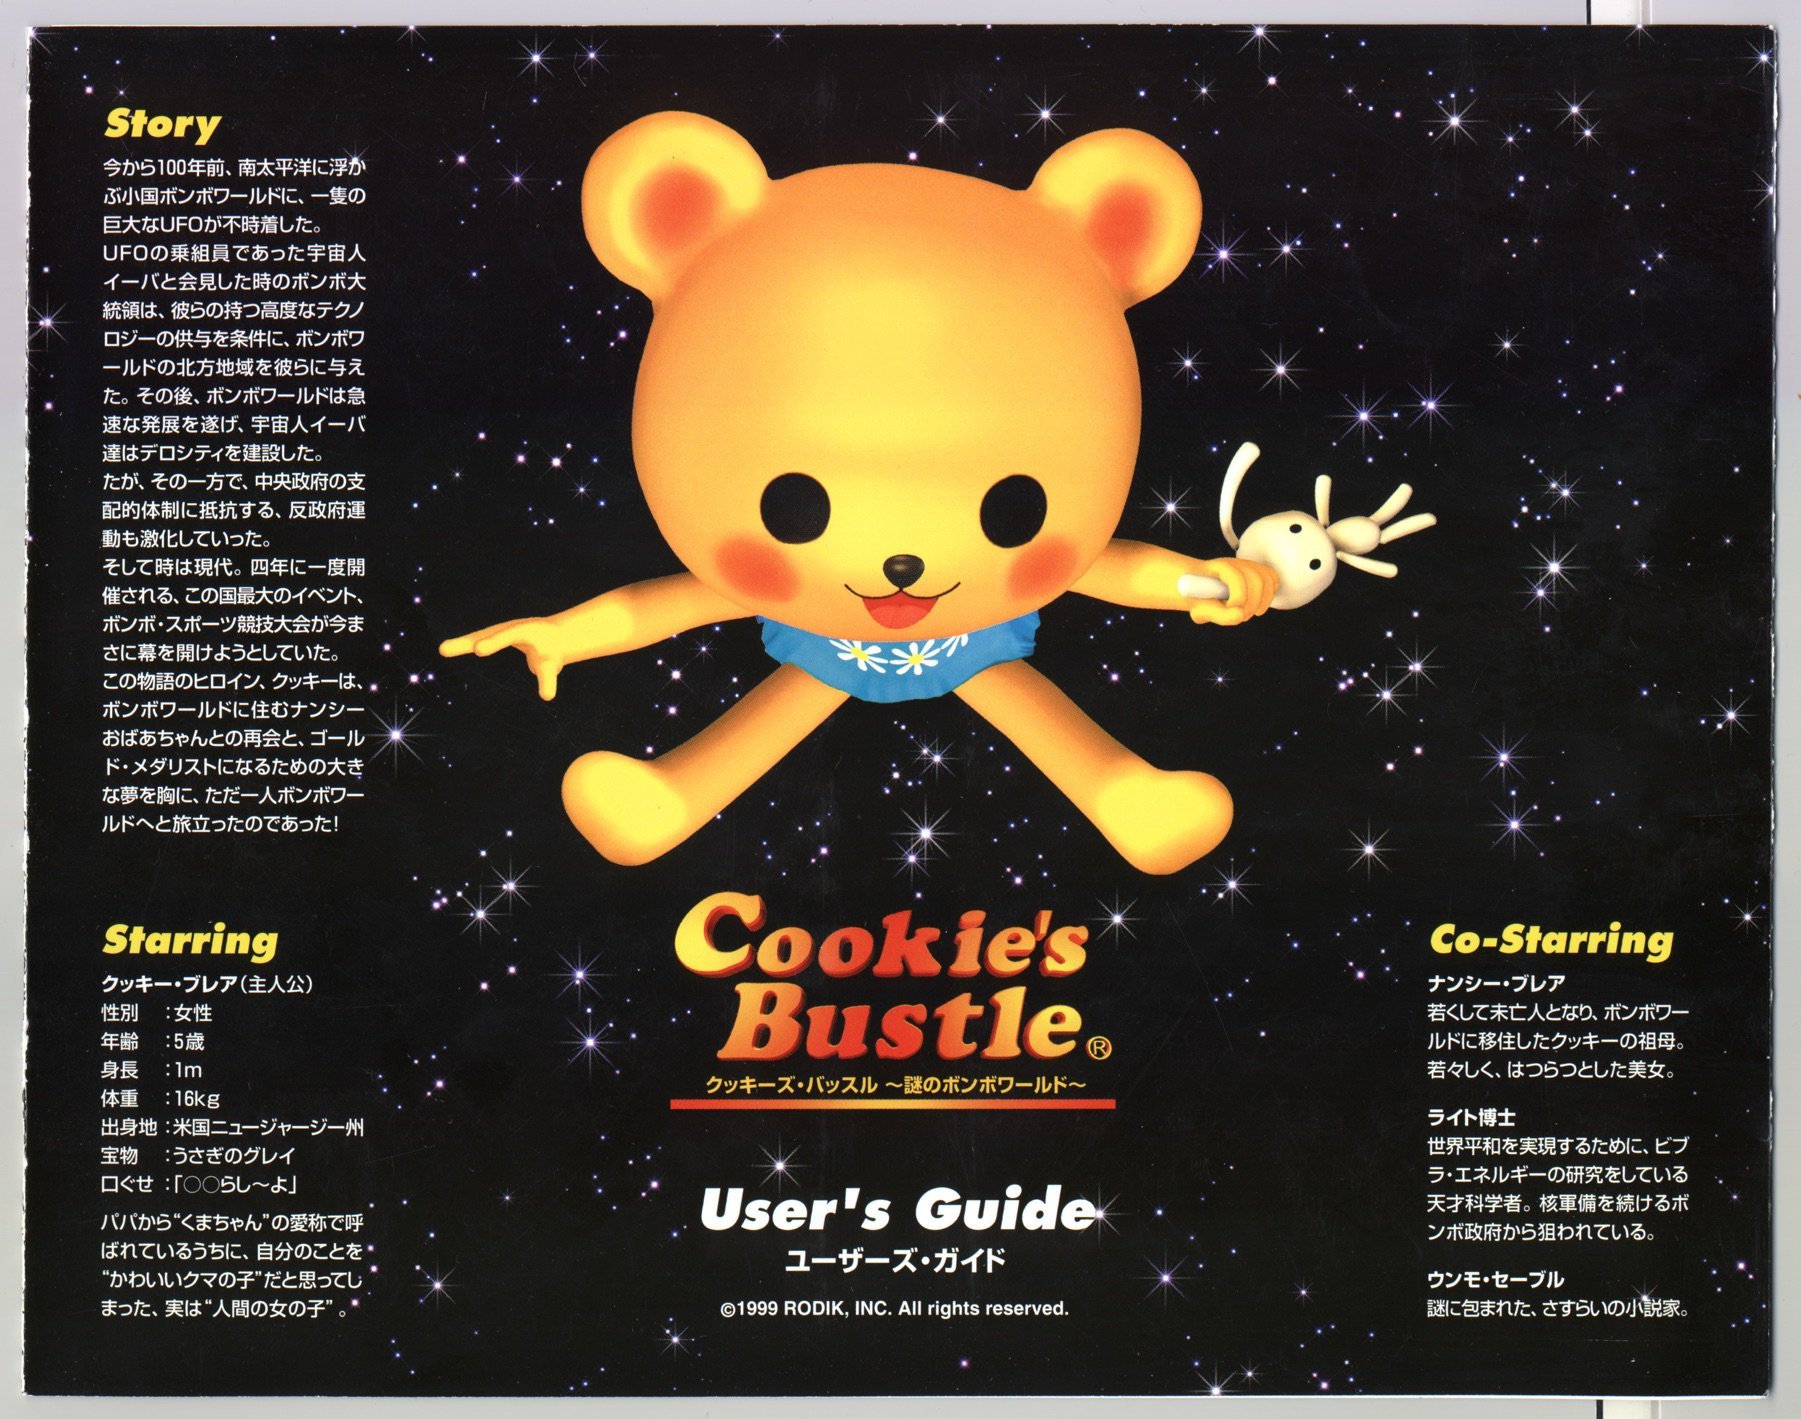 The cover of the Cookie's Bustle game manual.  Cookie is in the center, jumping up, holding her stuffed rabbit.  Below her is 3D text reading 'Cookie's Bustle', with a japanese subtitle written underneath.  Below that 'User's Guide' is written in white text, with more japanese text written under that (presumably 'User's Guide' translated).  There are three paragraphs written in Japanese along the sides, with the english titles, from left to right, top-down, Story, Starring, and Co-Starring.  I really, really wish I could translate it all for you.